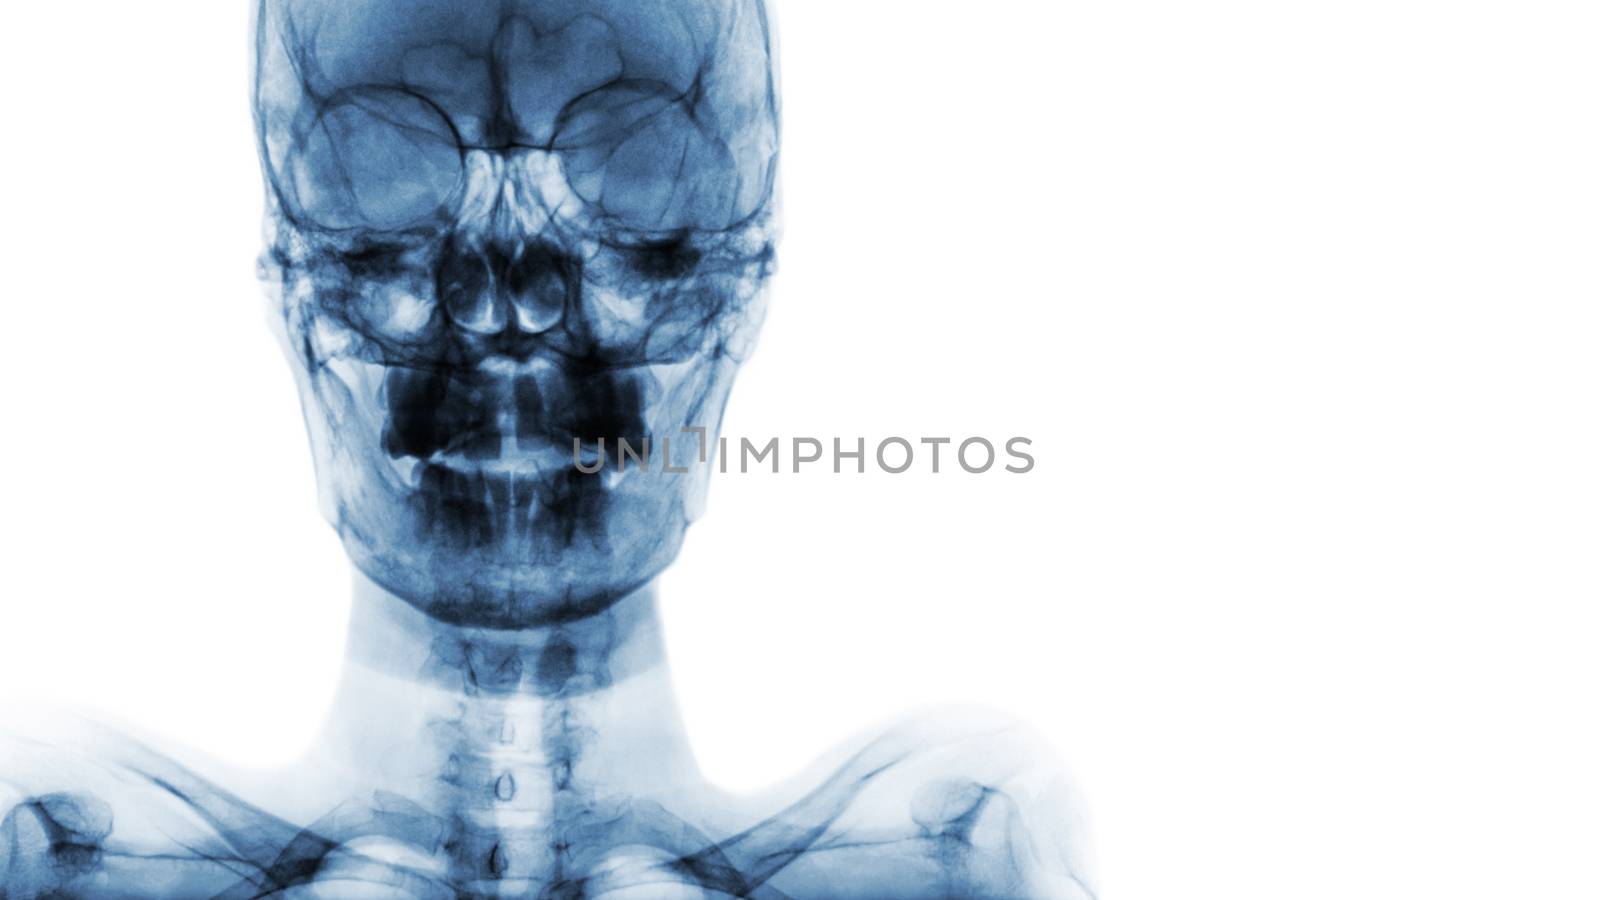 film x-ray Skull AP : show normal human's skull and blank area at right side by stockdevil